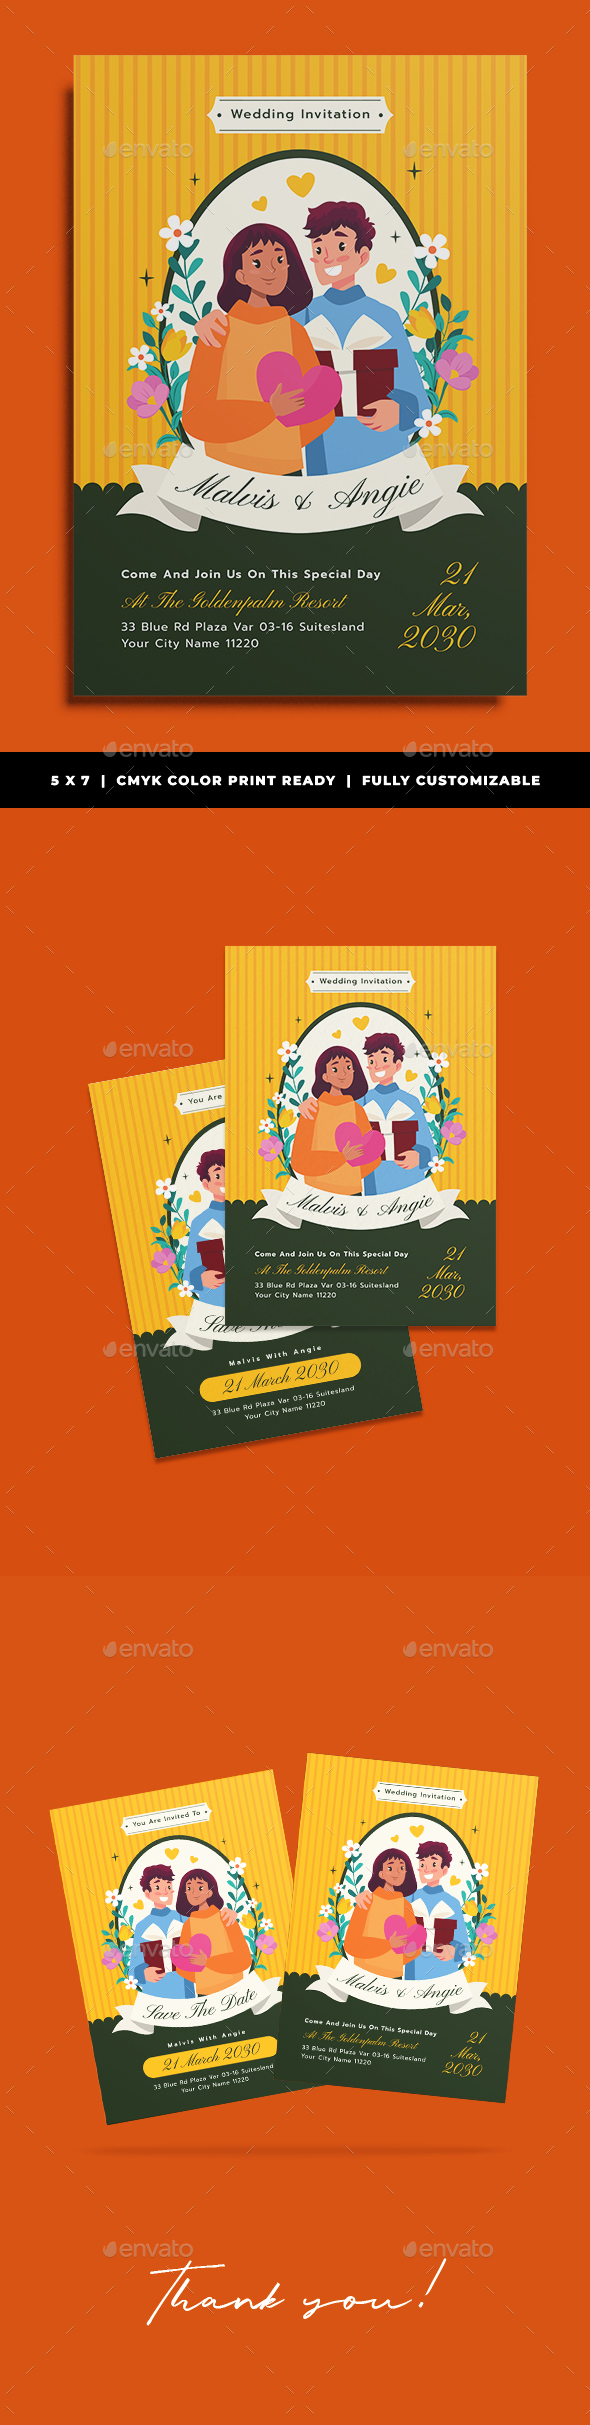 [DOWNLOAD]Layblooms Wedding Invitation Template